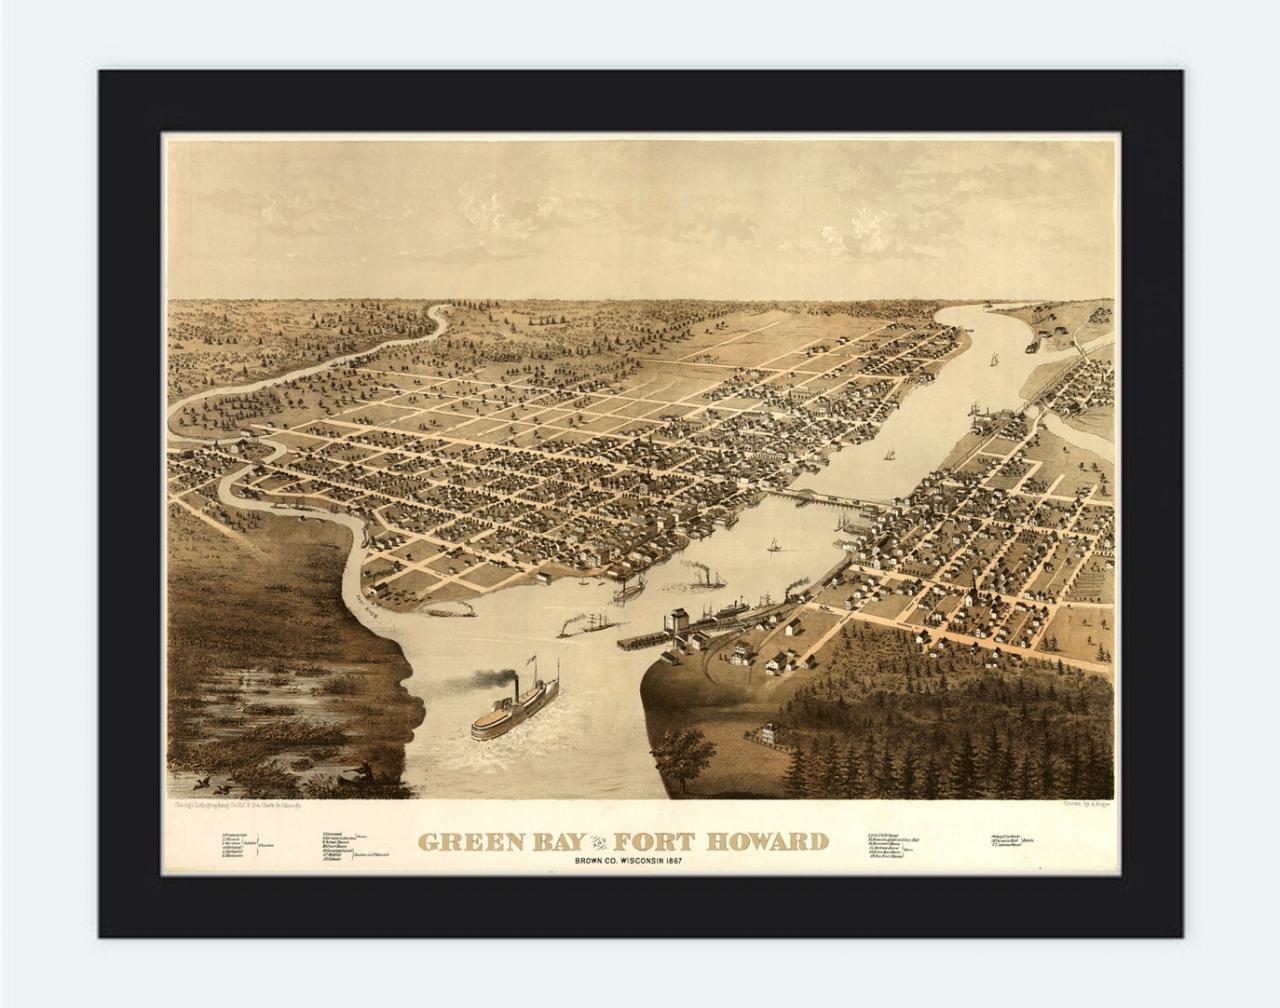 Green Bay Fort Howard Wisconsin 1867 Panoramic View Vintage